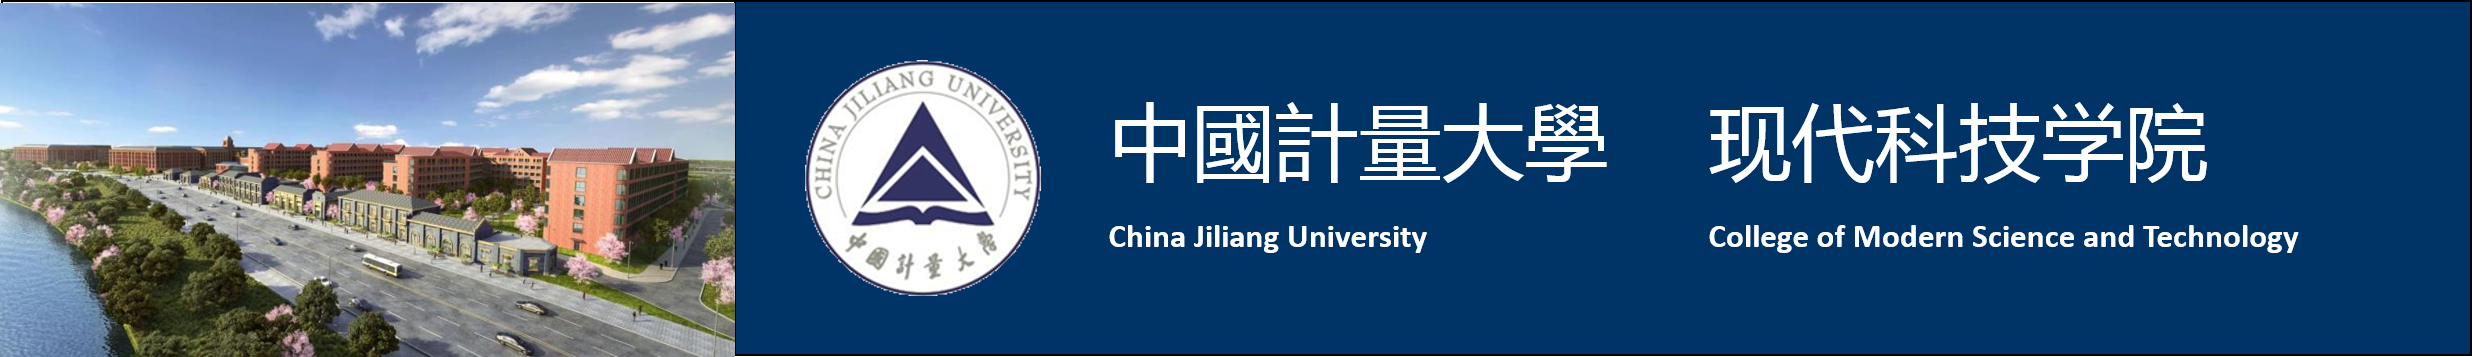 CJLU College of Science and Technology - Yiwu